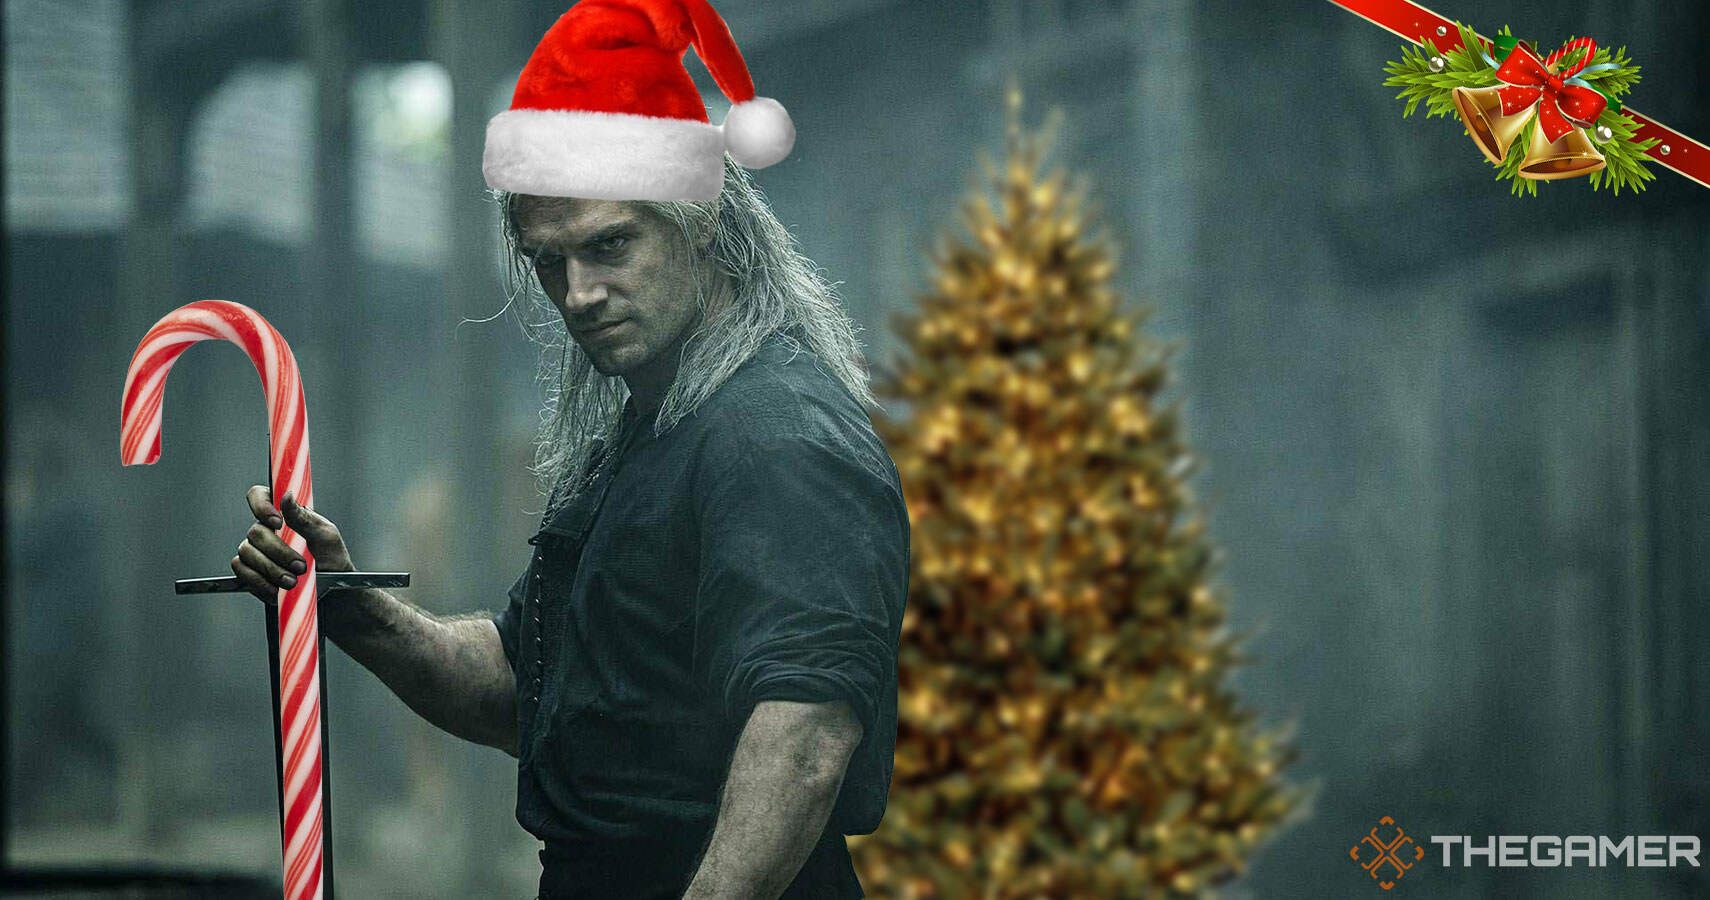 Netflix's Witcher Twitter Account Just Announced “6 Days Of Witchmas,” Whatever That Means